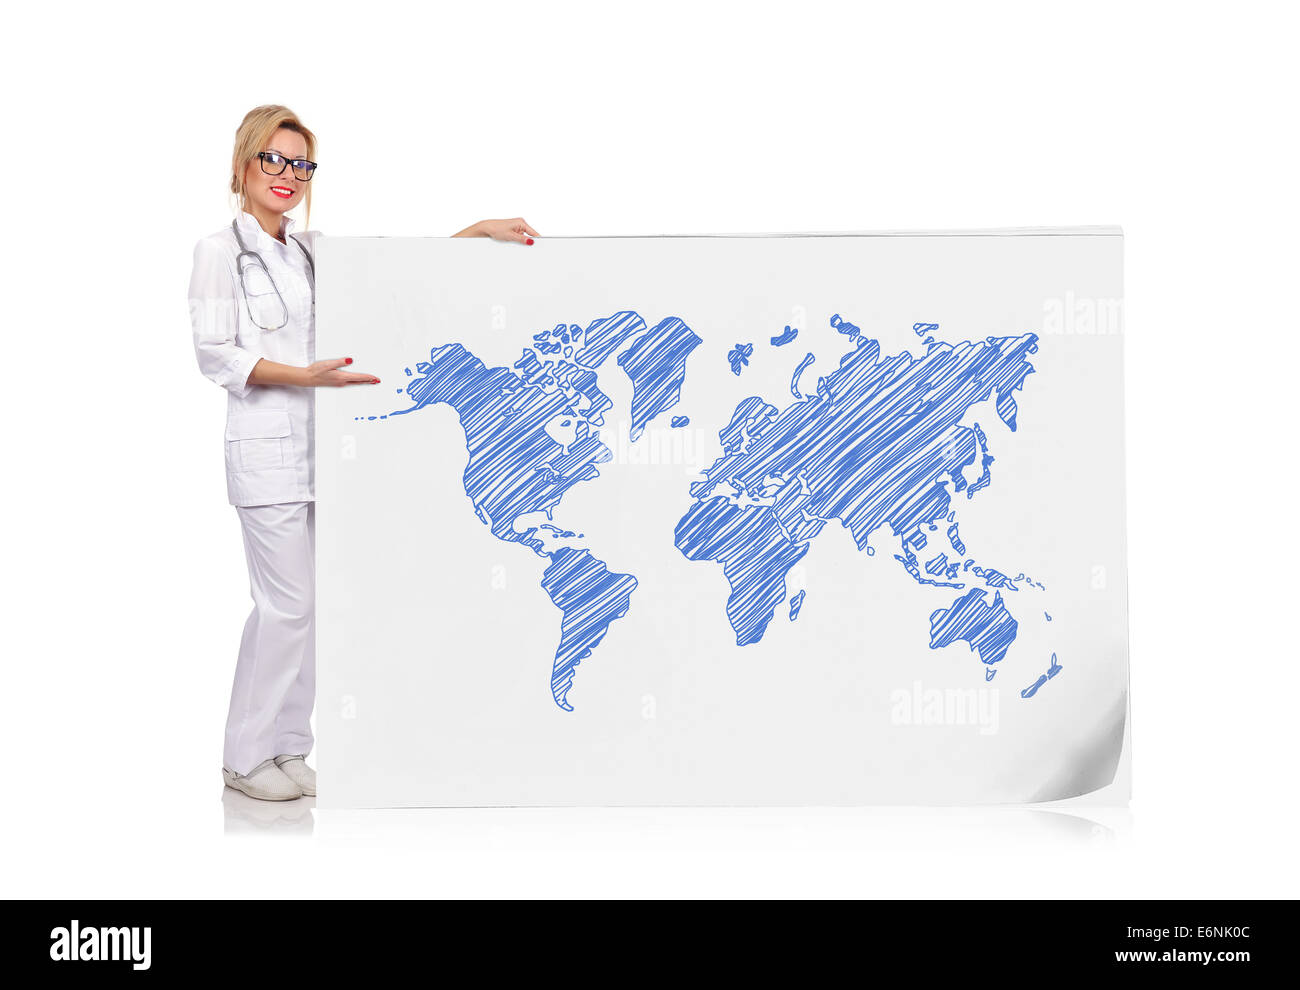 young female doctor holding poster with drawing world map Stock Photo